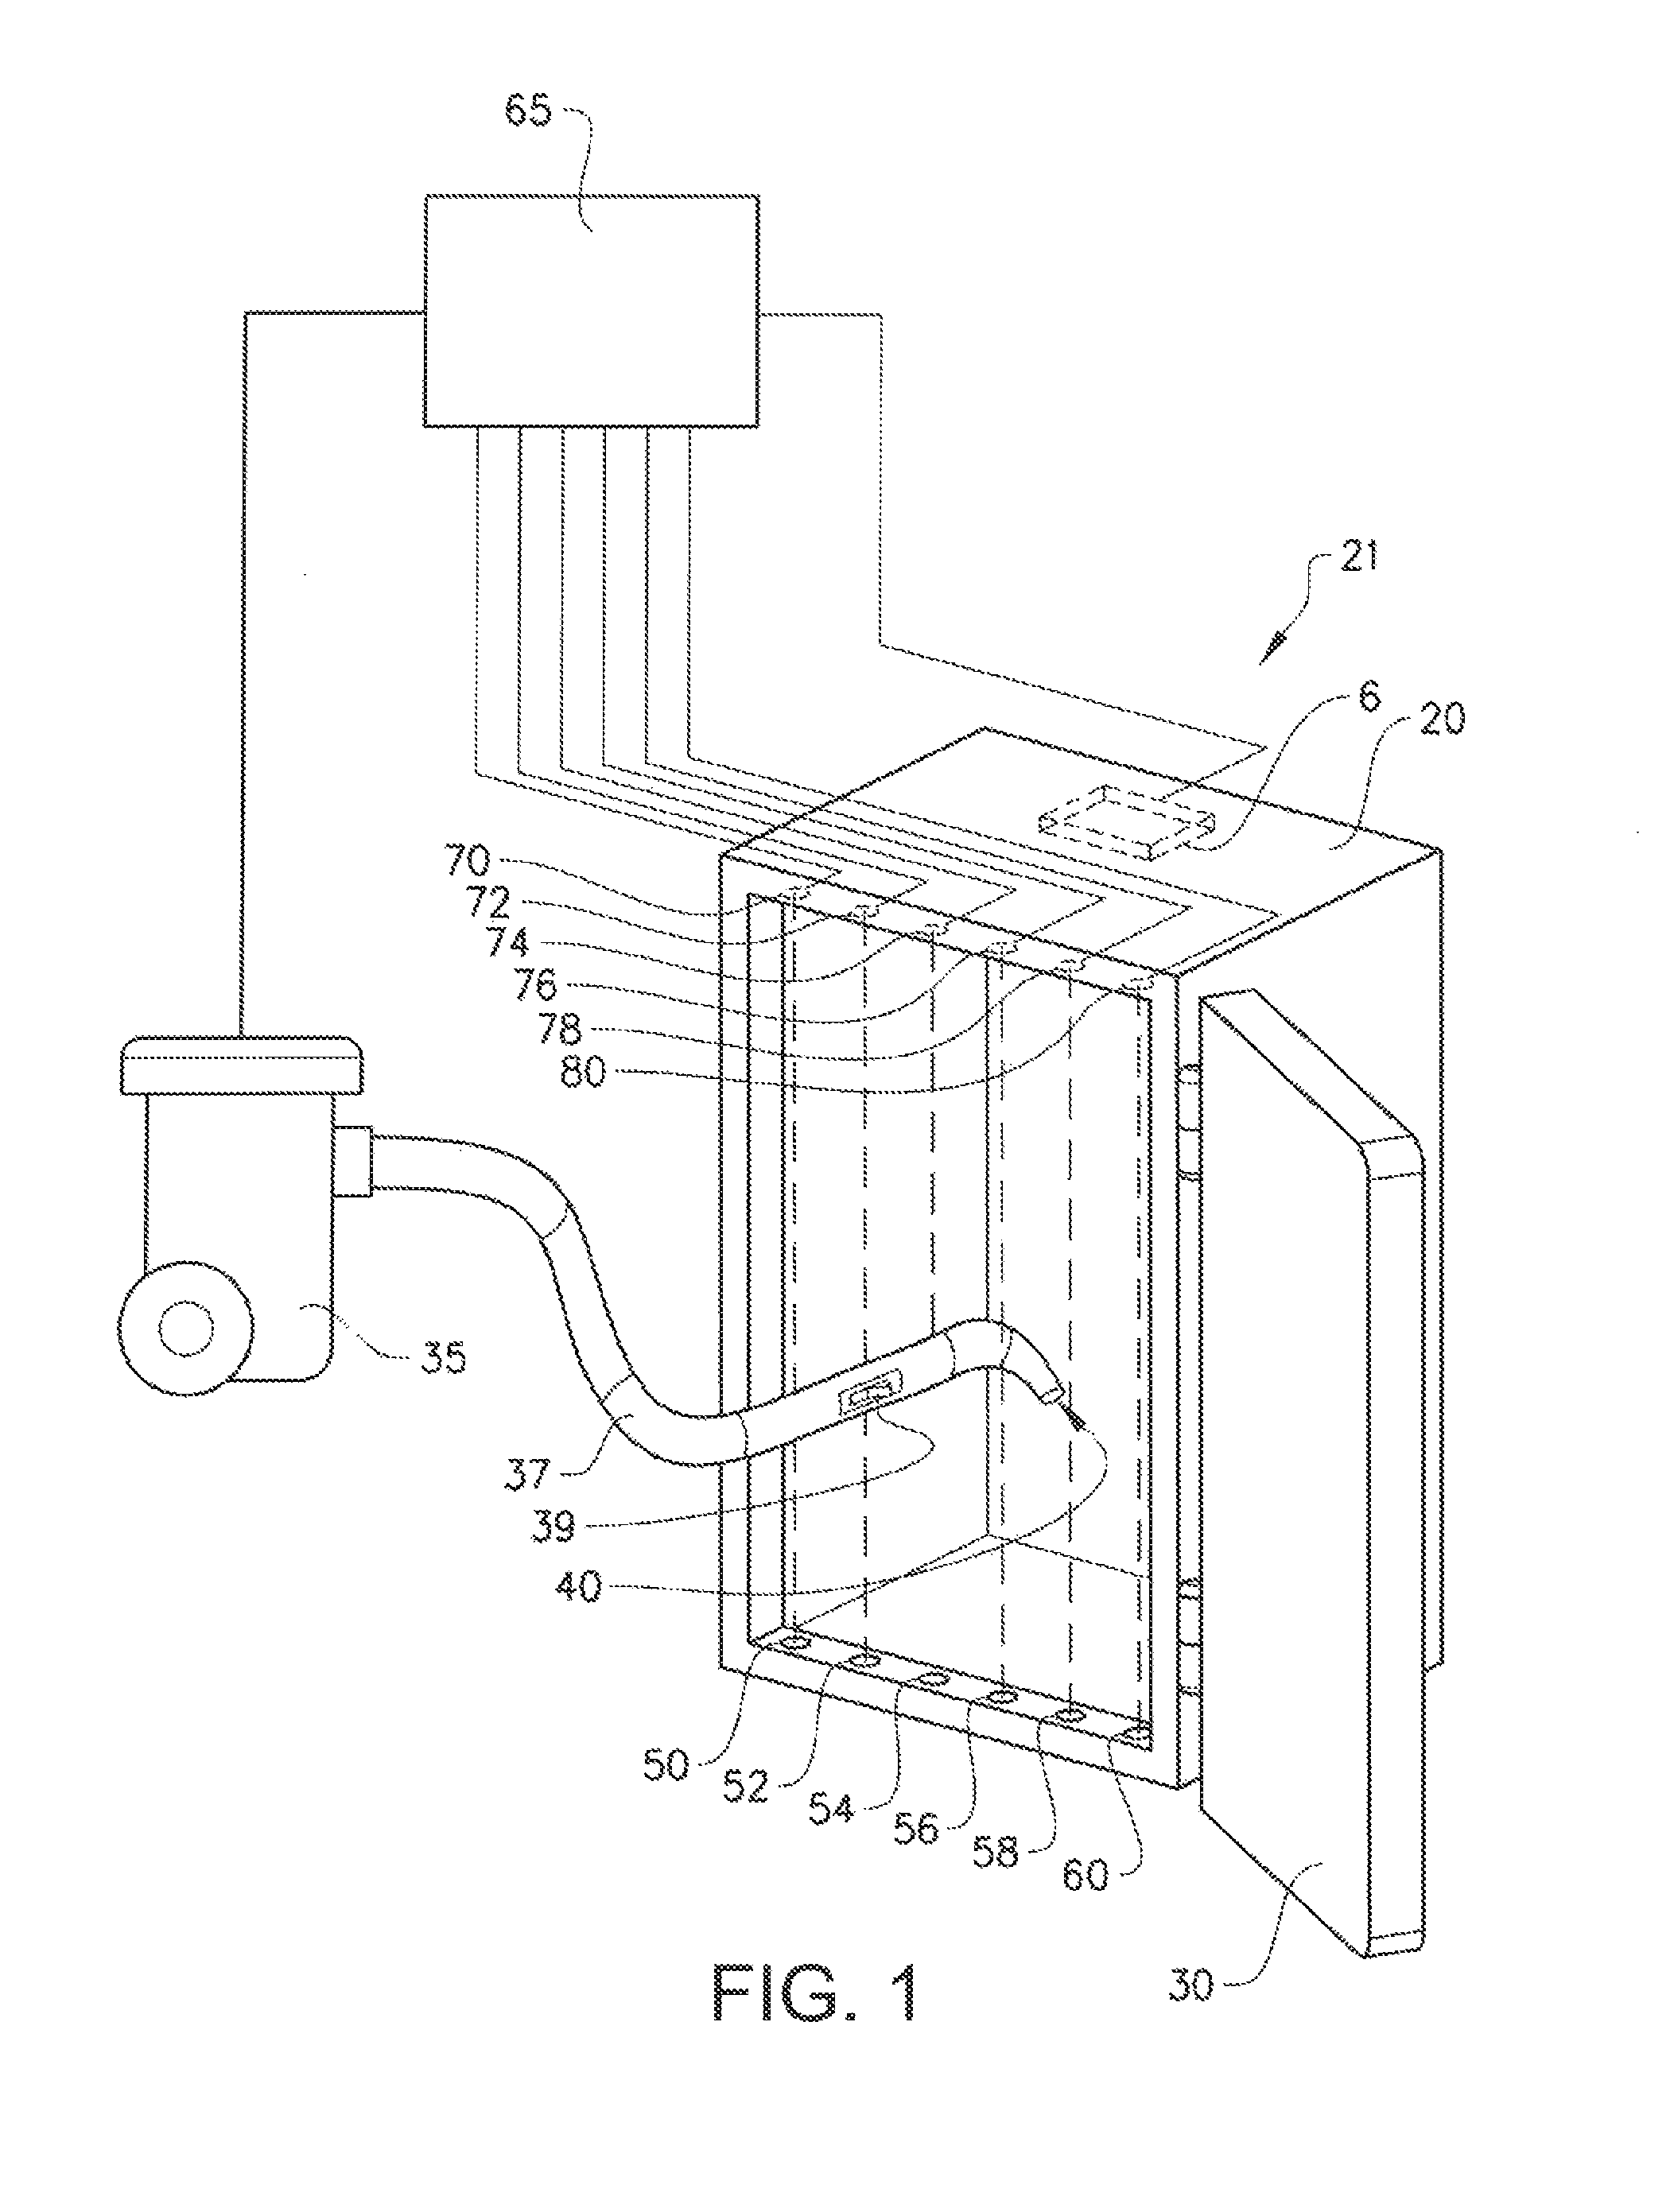 Safety protection method and apparatus for additive manufacturing device